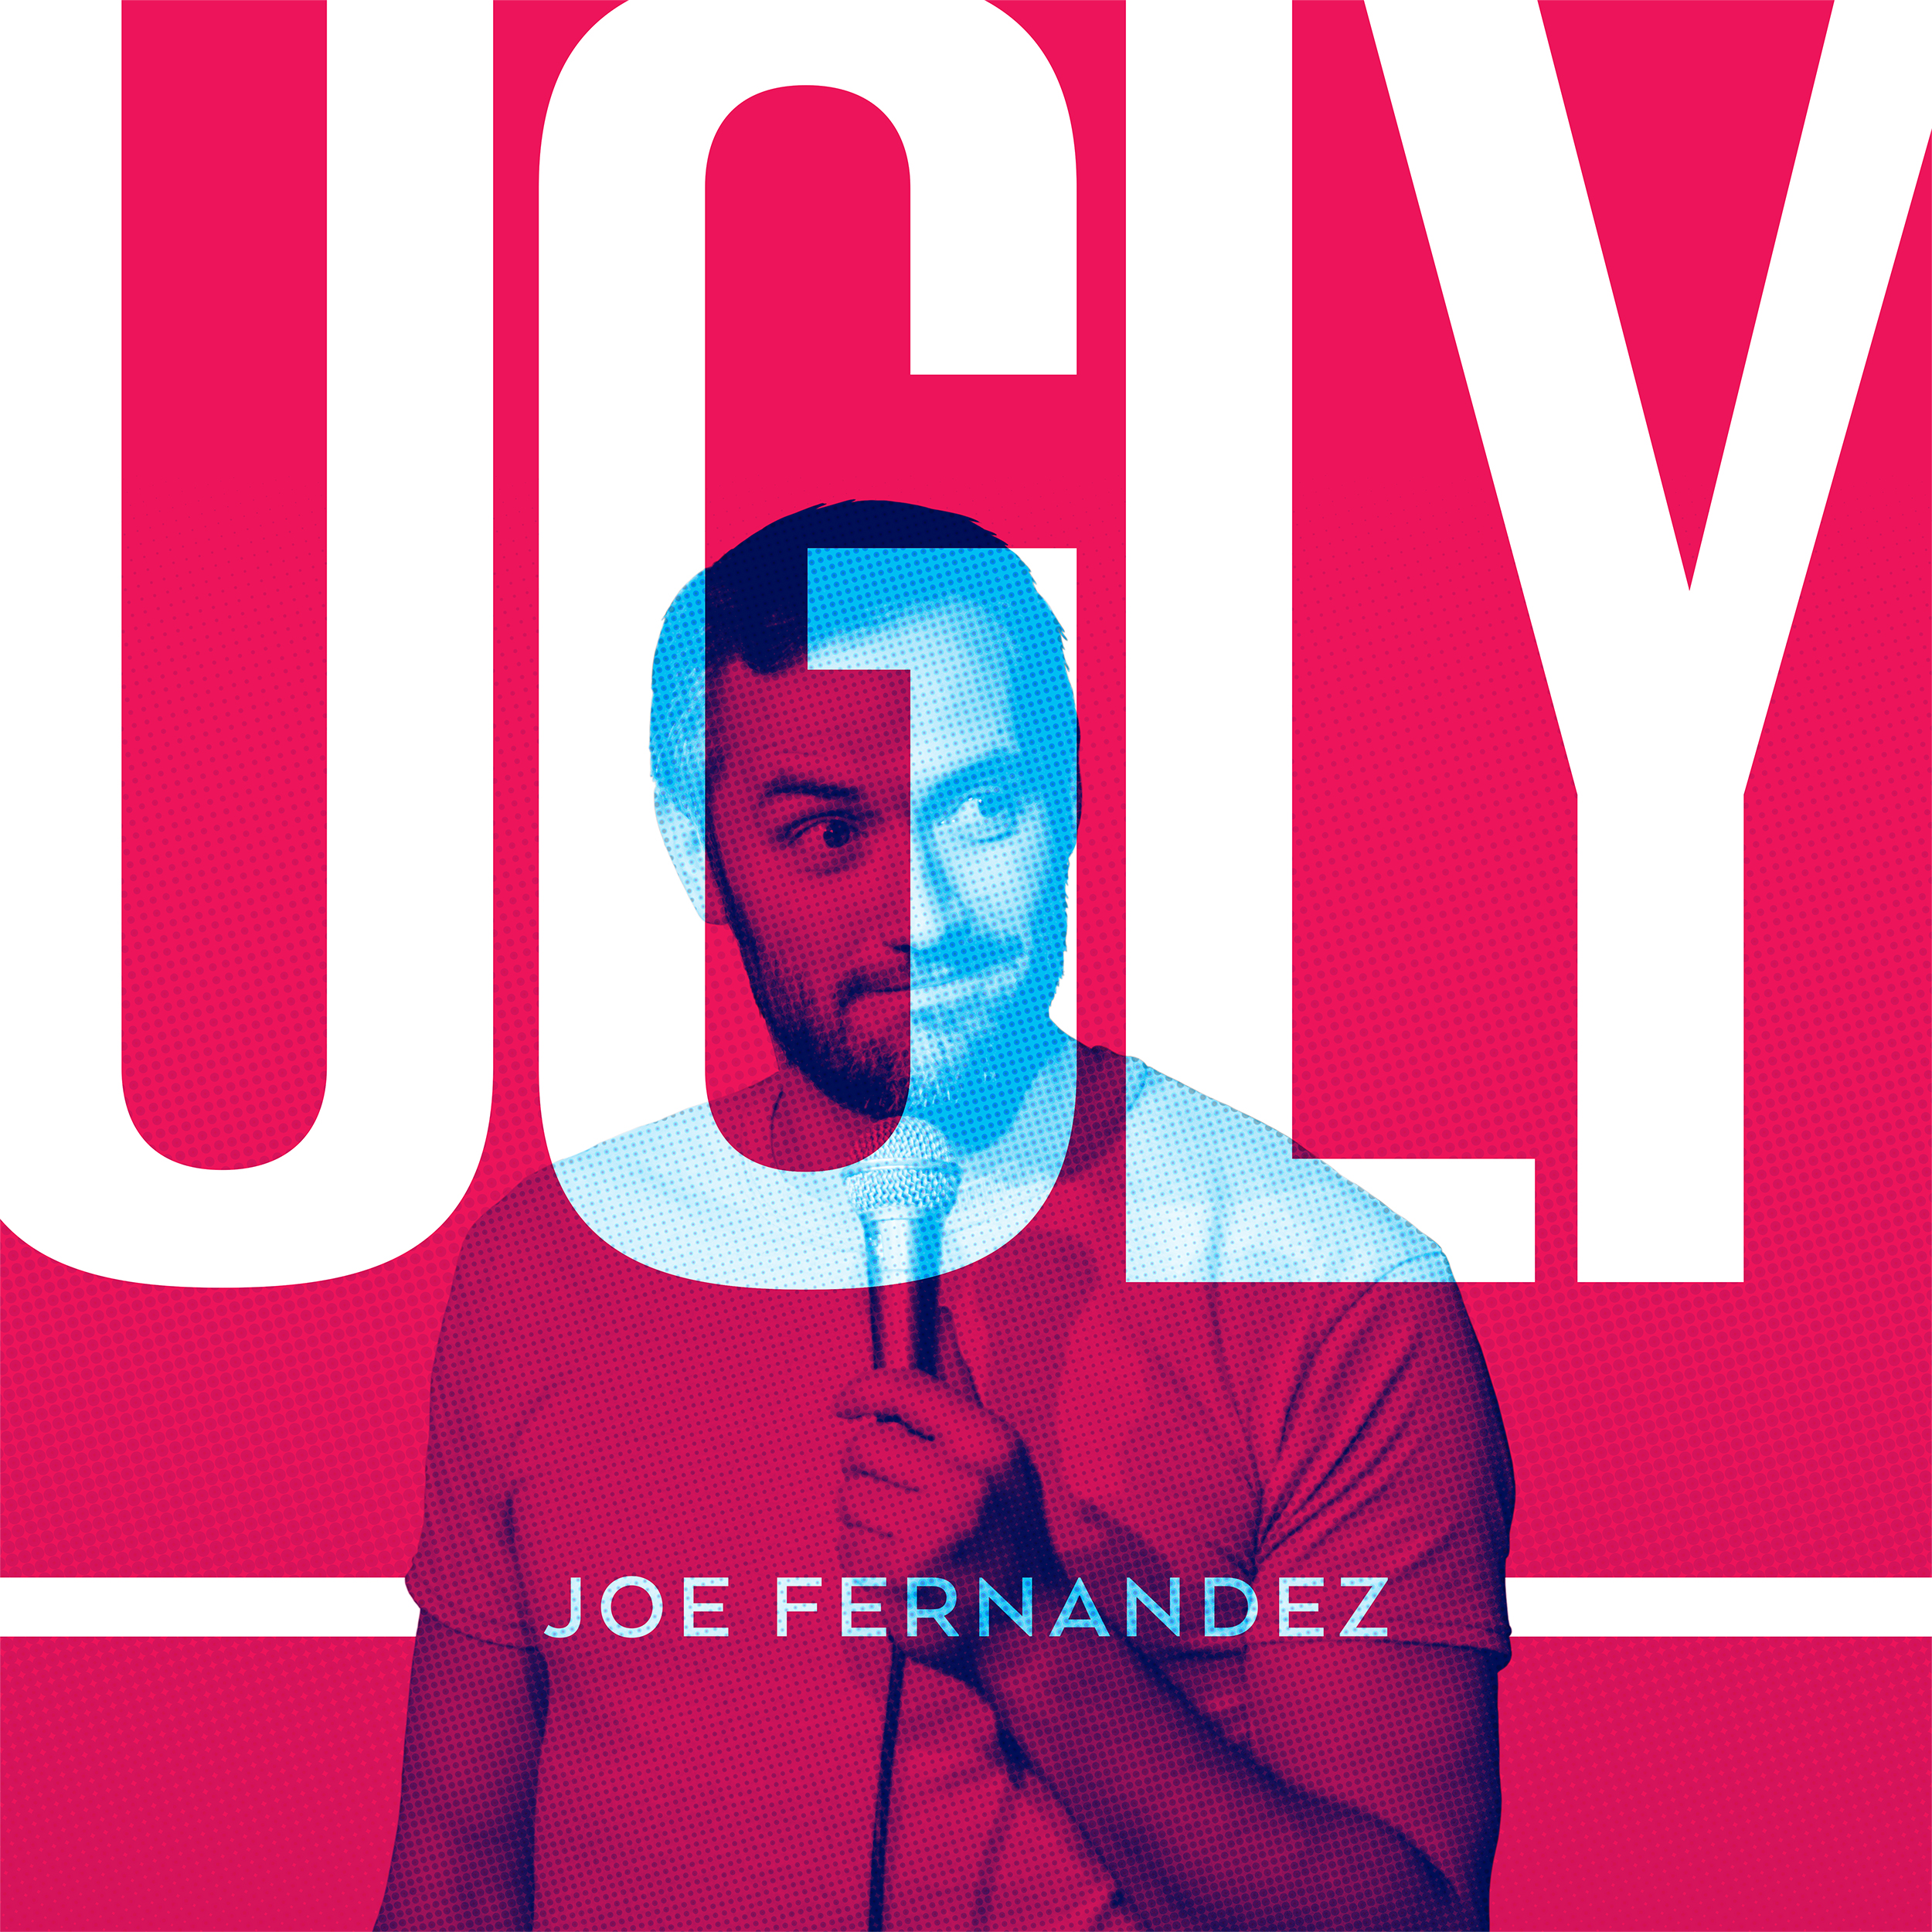 jf-ugly-final-2500px